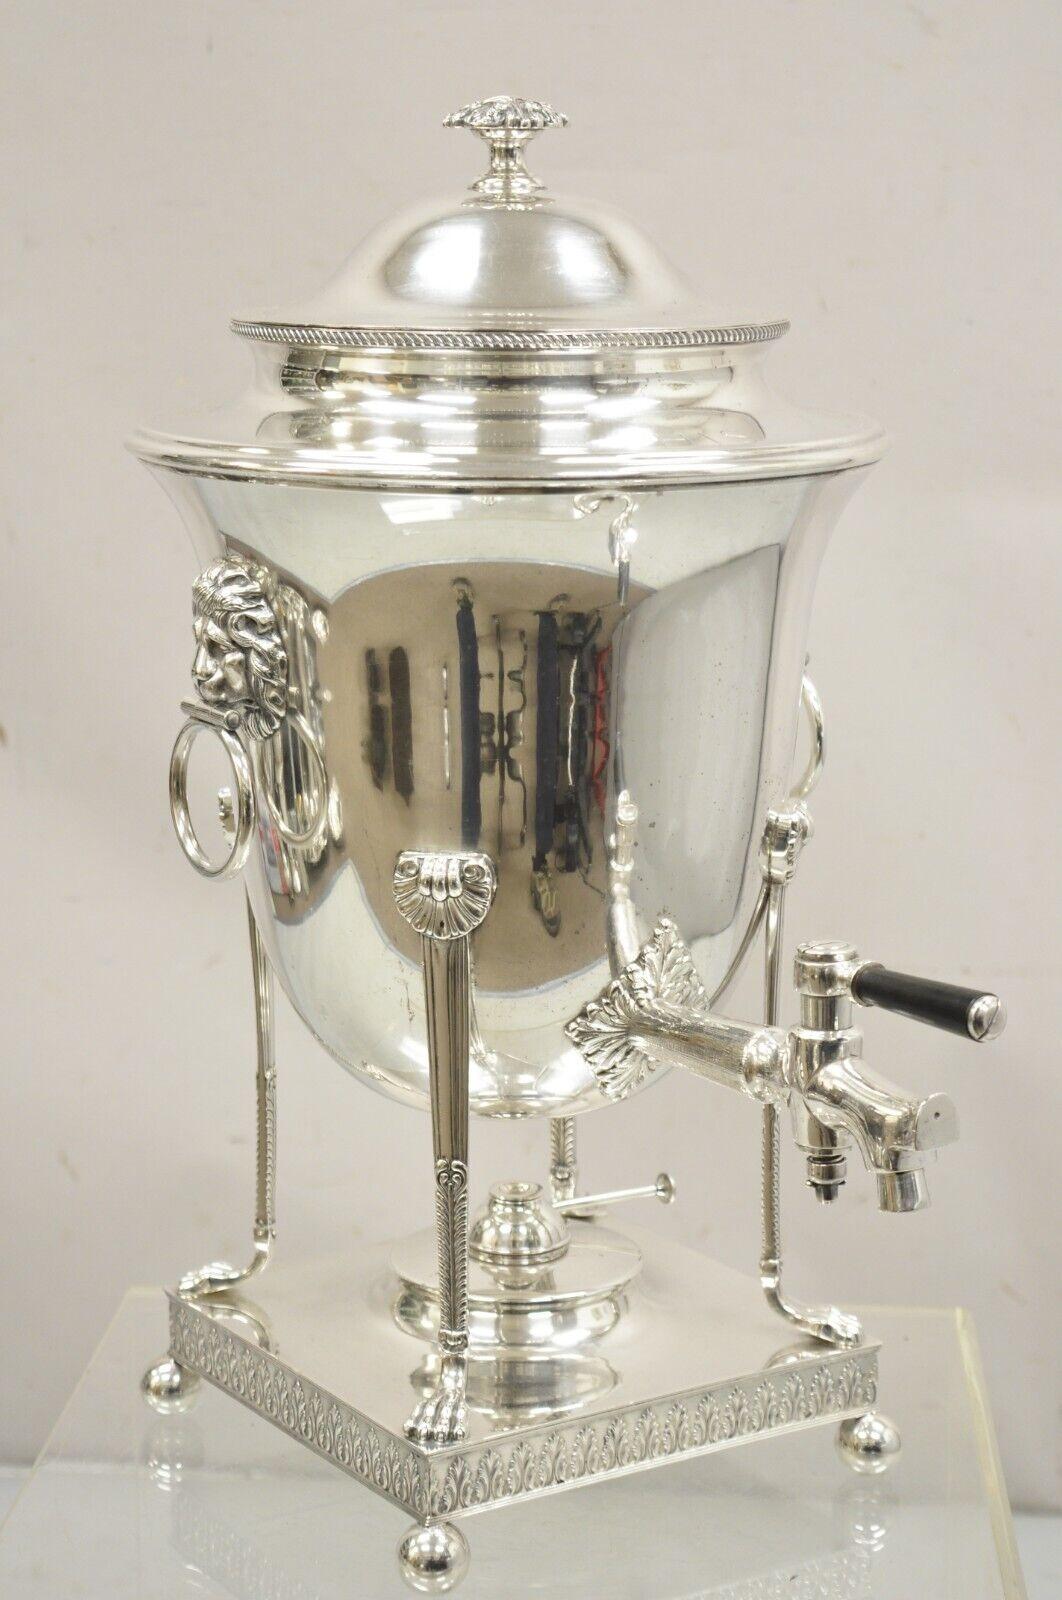 19th Century English Silver Plate Regency Paw Foot Samovar with Lions by Folgate with Monogram. Item features monogram 